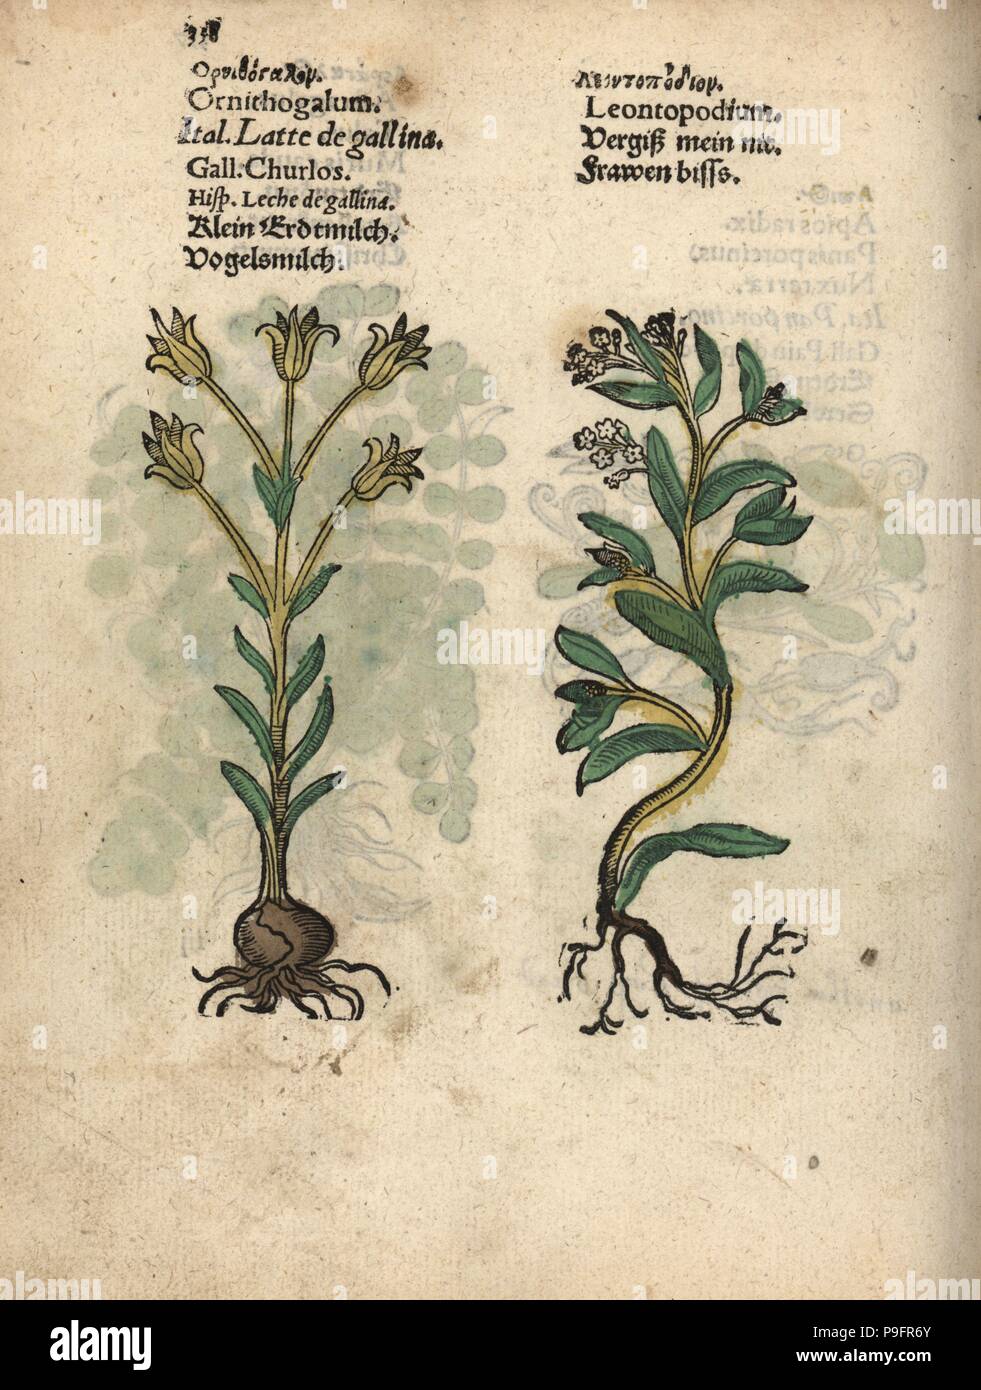 Star of Bethlehem, Ornithogalum umbellatum, and edelweiss, Leontopodium alpinum. Handcoloured woodblock engraving of a botanical illustration from Adam Lonicer's Krauterbuch, or Herbal, Frankfurt, 1557. This from a 17th century pirate edition or atlas of illustrations only, with captions in Latin, Greek, French, Italian, German, and in English manuscript. Stock Photo